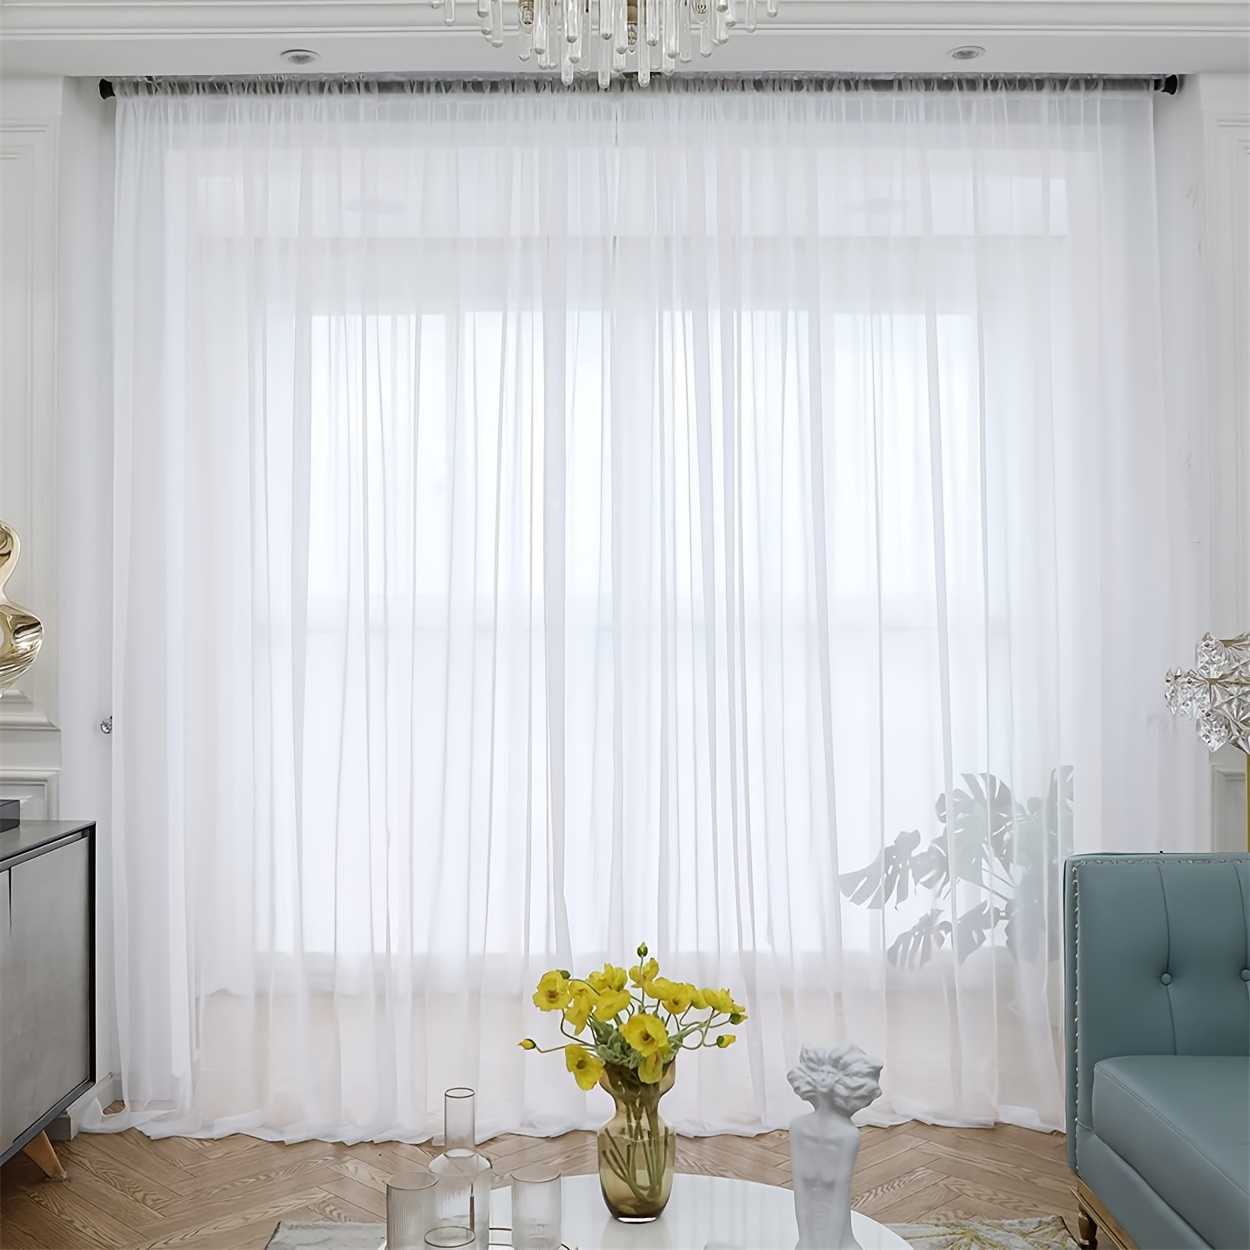 

1pc White Sheer Voile Curtain, Rod Pocket Voile Window Drapes, For Living Room And Bedroom Office Home Decoration